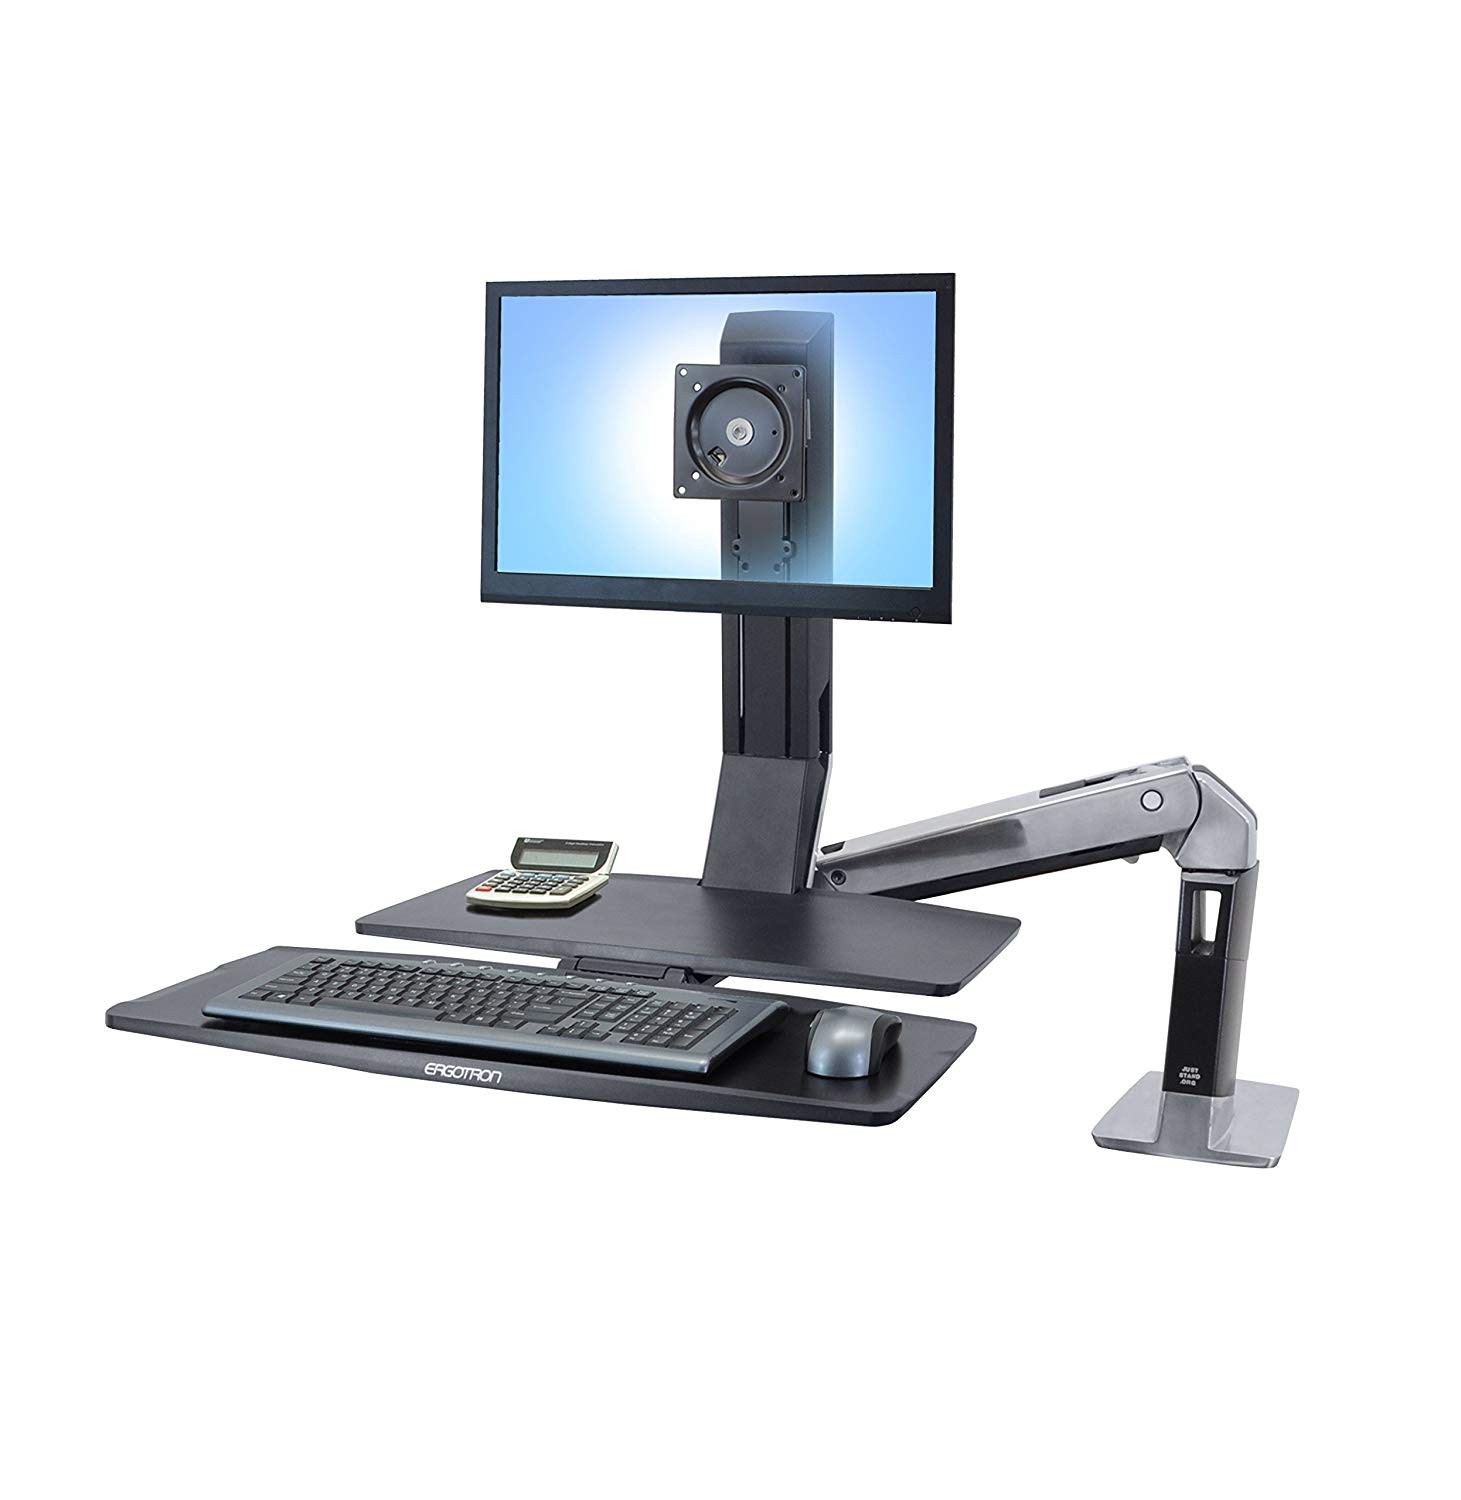 Ergotron 24-317-026 WorkFit-A Single LD Workstation With Worksurface 24-317-026